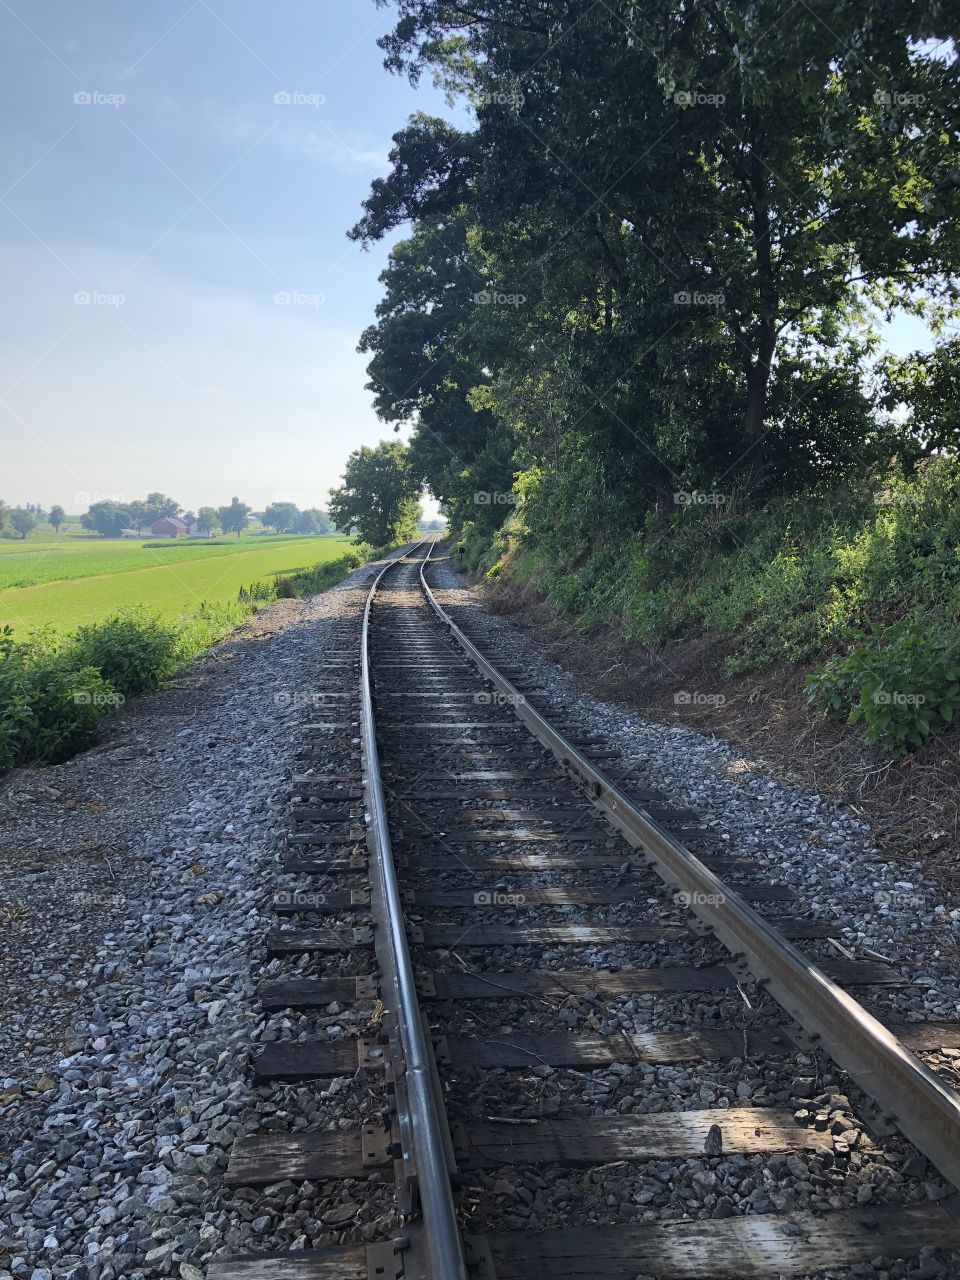 Looking down the tracks of the Strasburg Railroad toward East Strasburg. This picture was taken from the Blackhorse Road grade crossing, otherwise known as Carpenter’s Crossing.